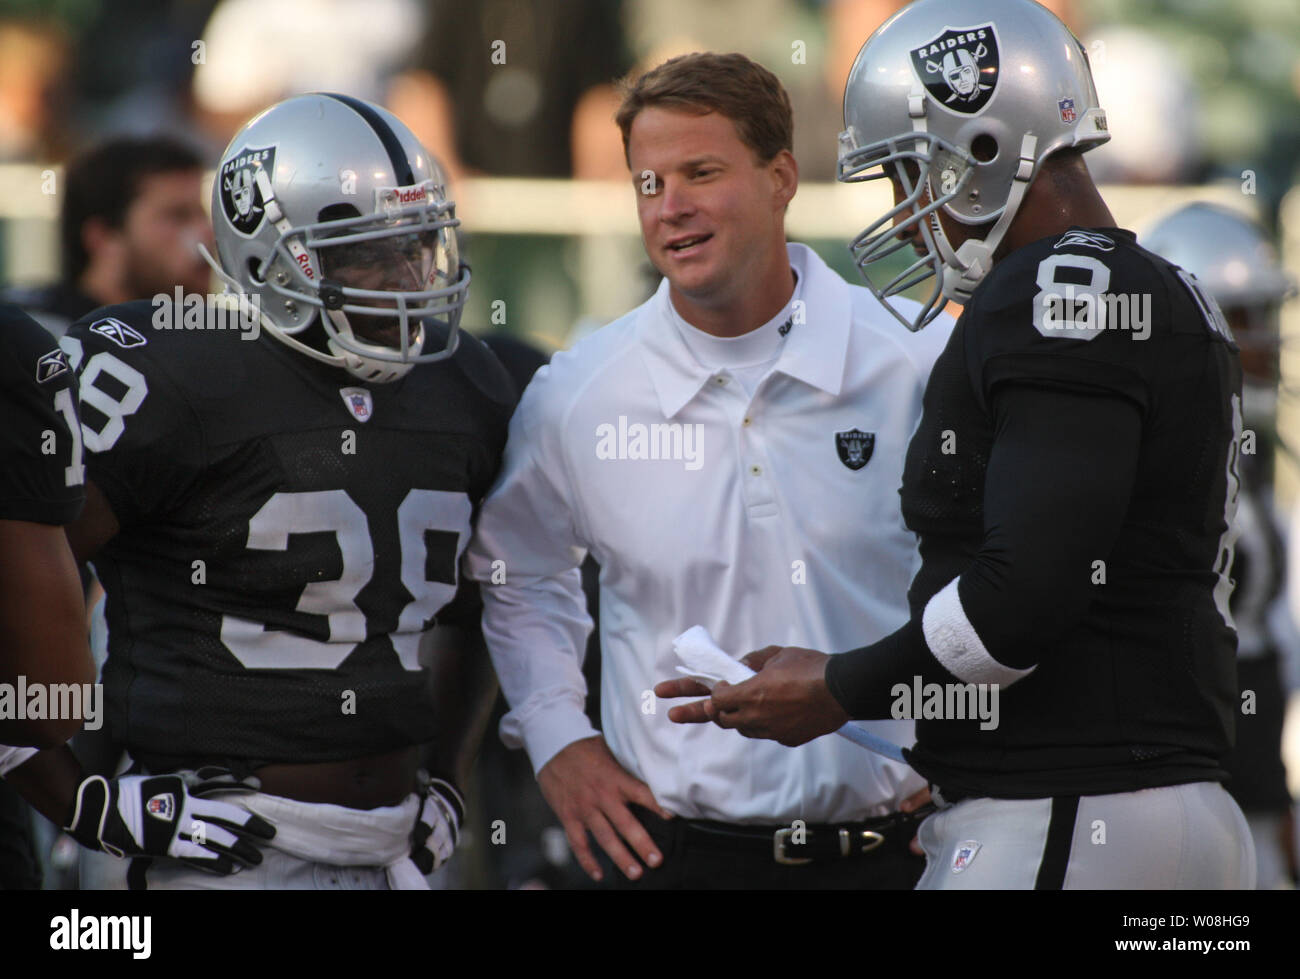 Oakland Raiders Head Coach Lane Kiffin (C) chats with RB Adimchinobe Echemandu (38) and QB Daunte Culpepper  as they warm up to play the St. Louis Rams at McAfee Coliseum in Oakland, California on August 24, 2007.    (UPI Photo/Terry Schmitt) Stock Photo